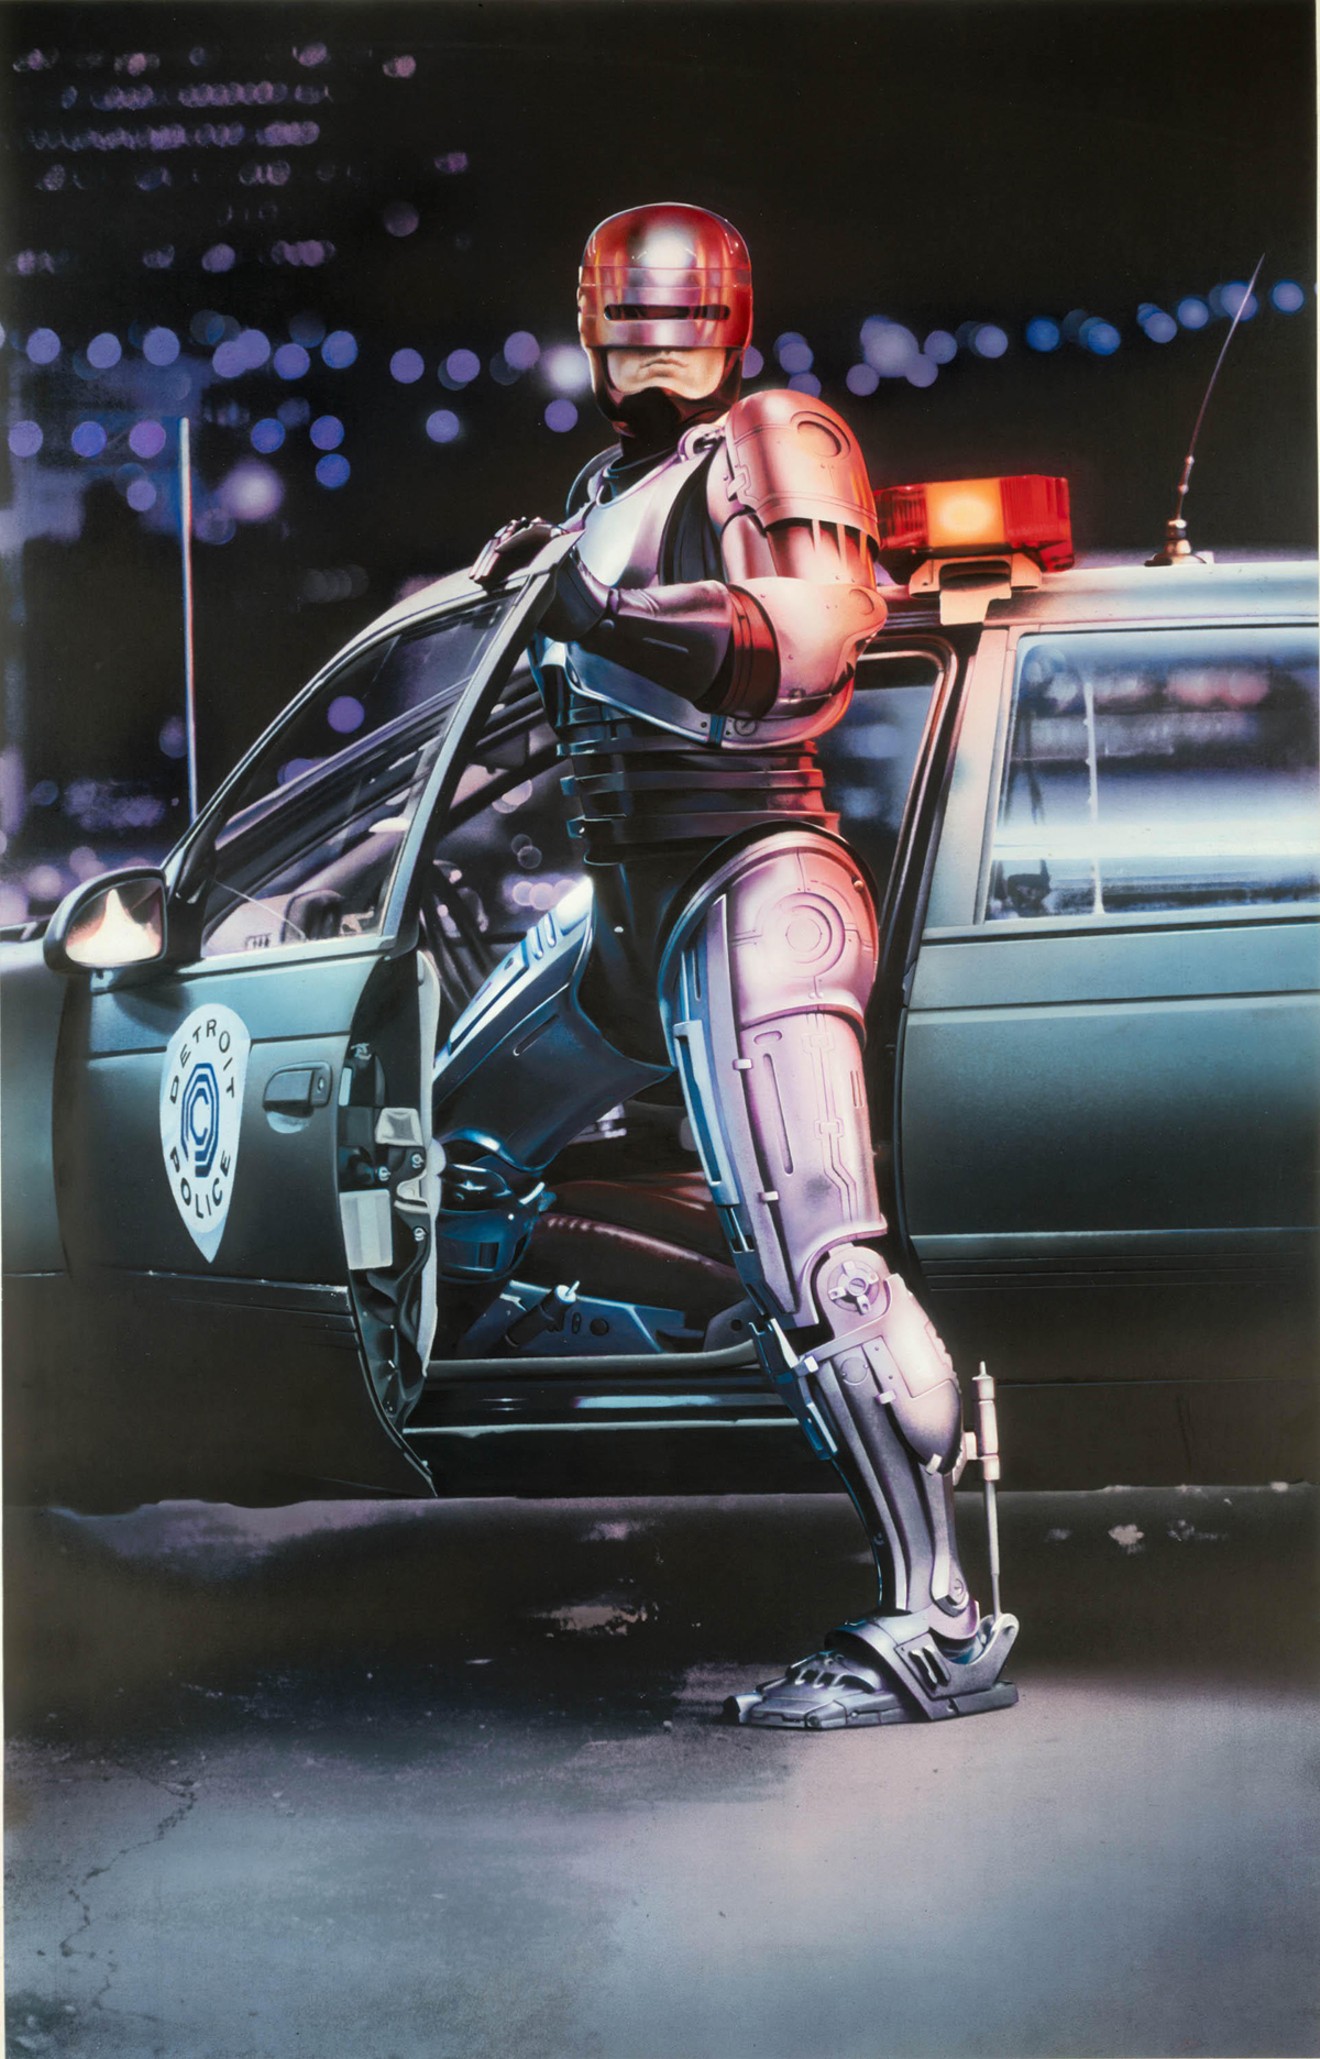 RoboCop is set in Detroit but was filmed mostly in Dallas.